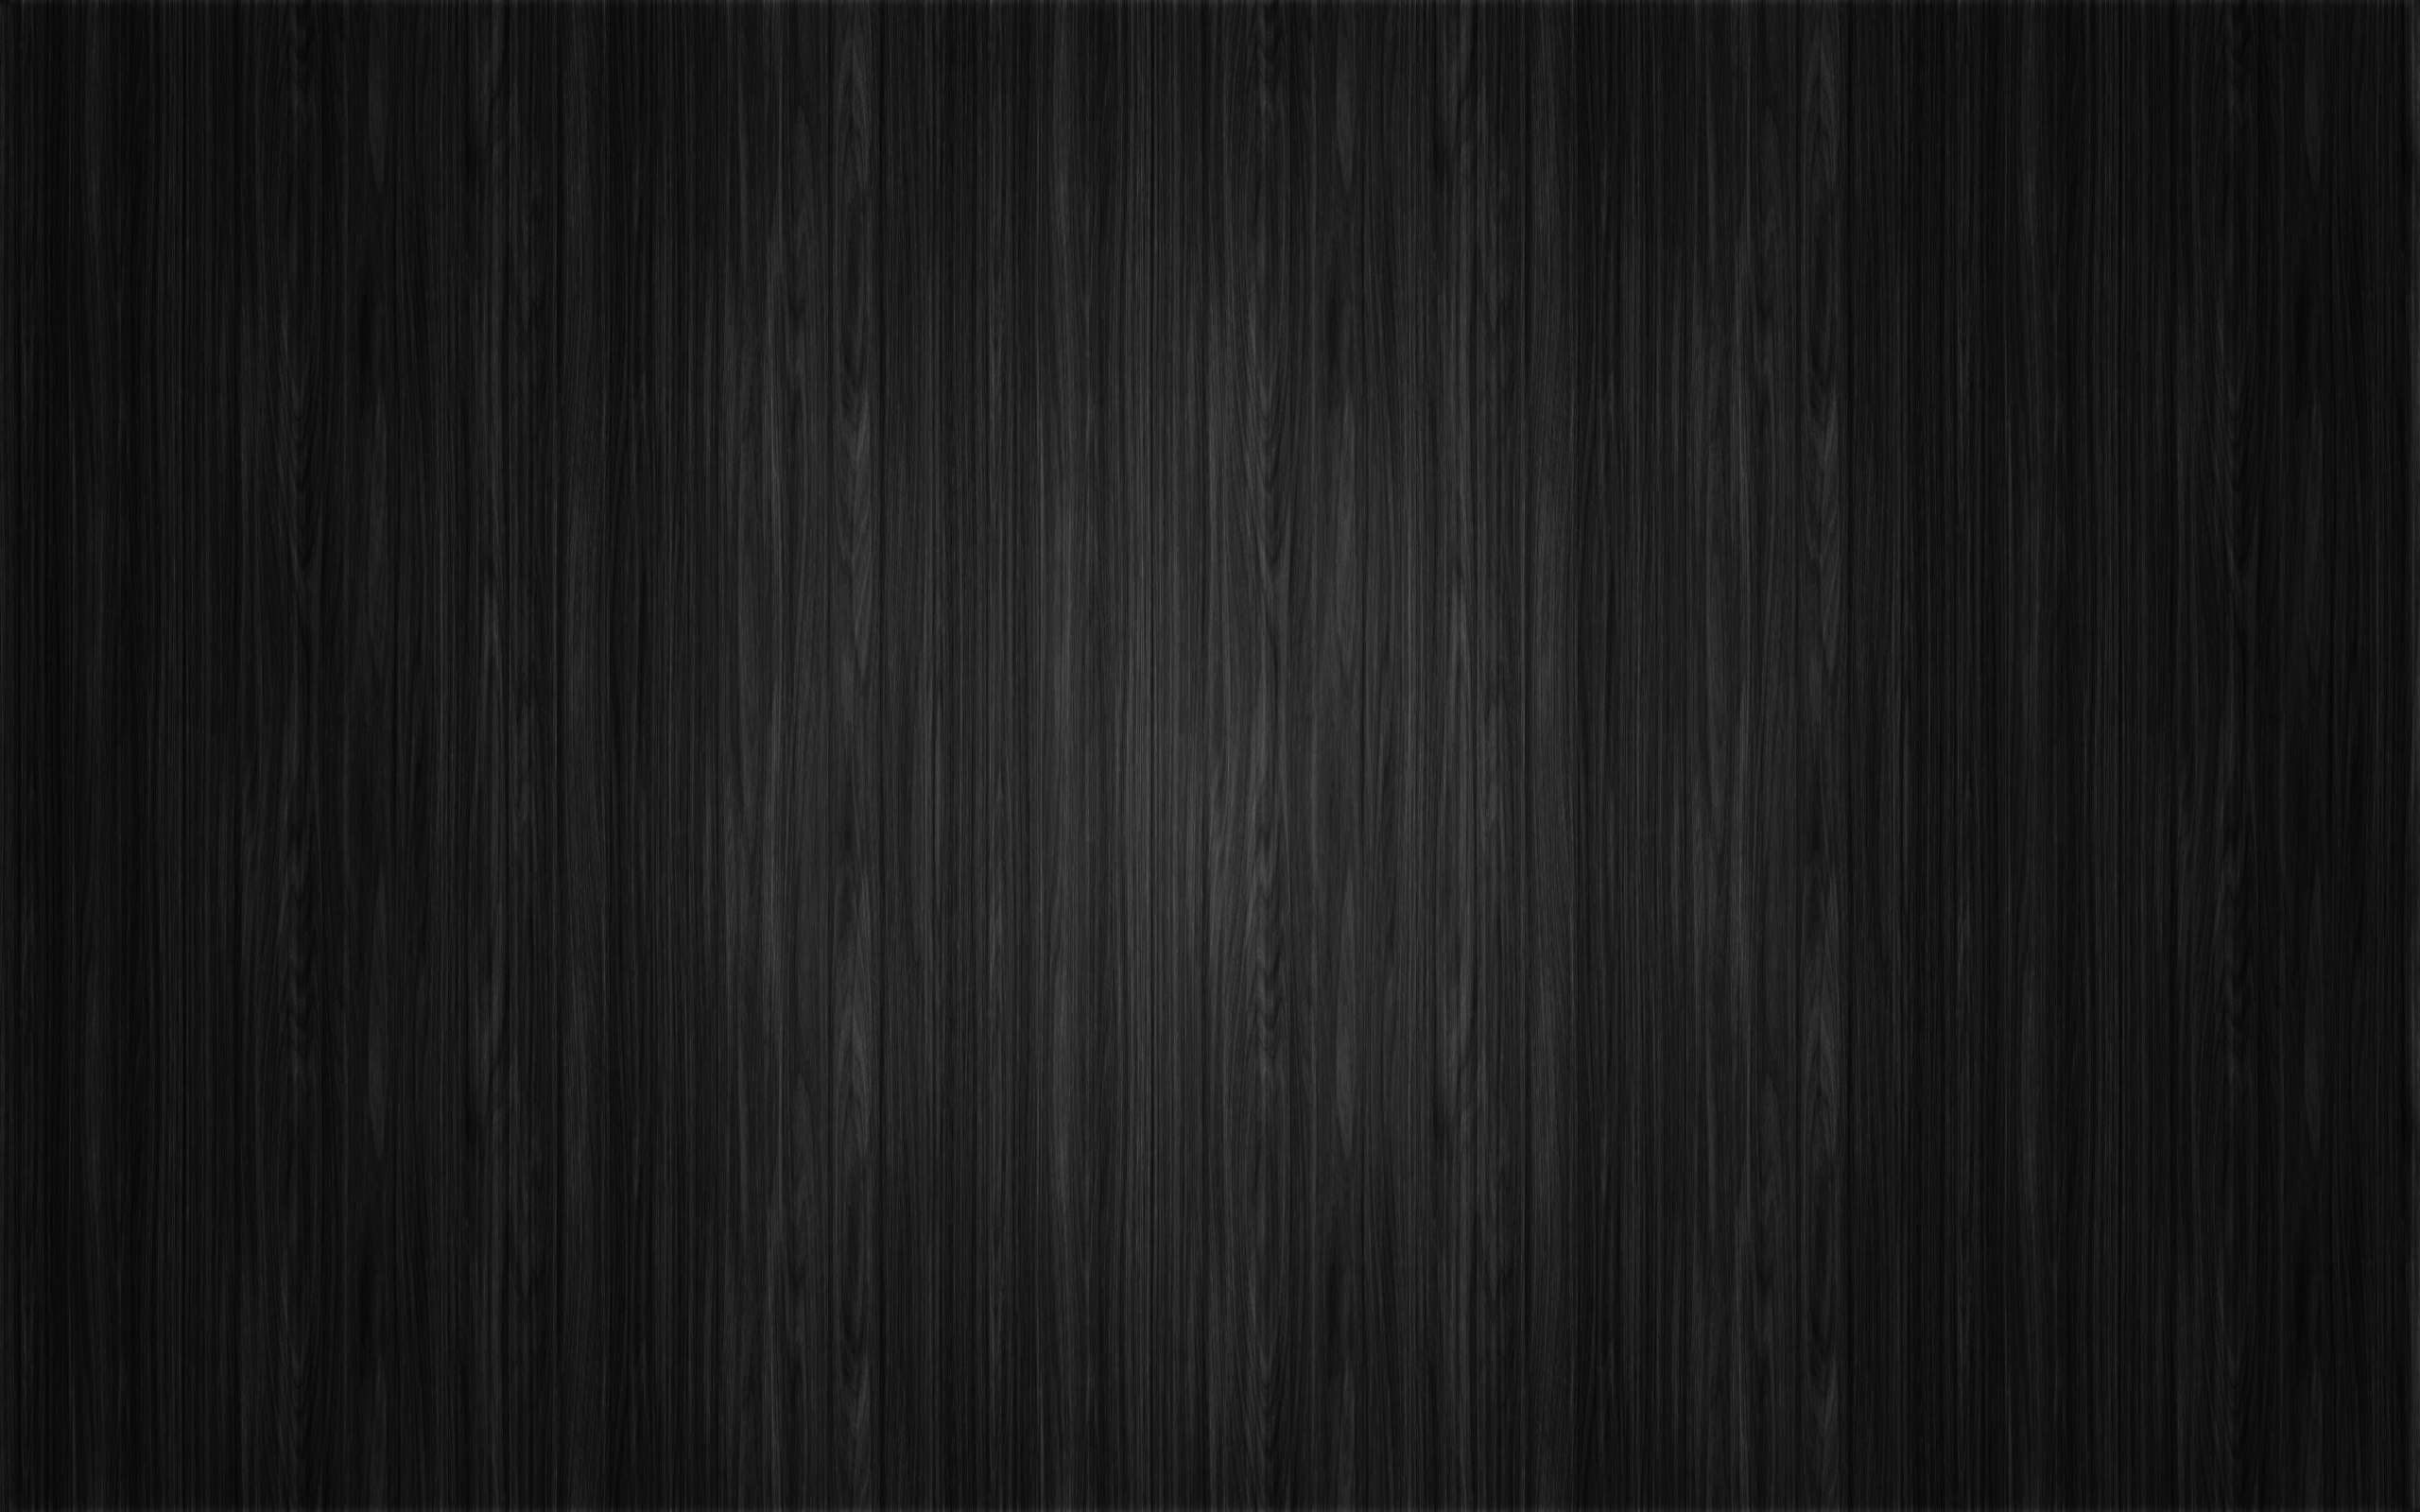 2009 wallpaper background black abstract